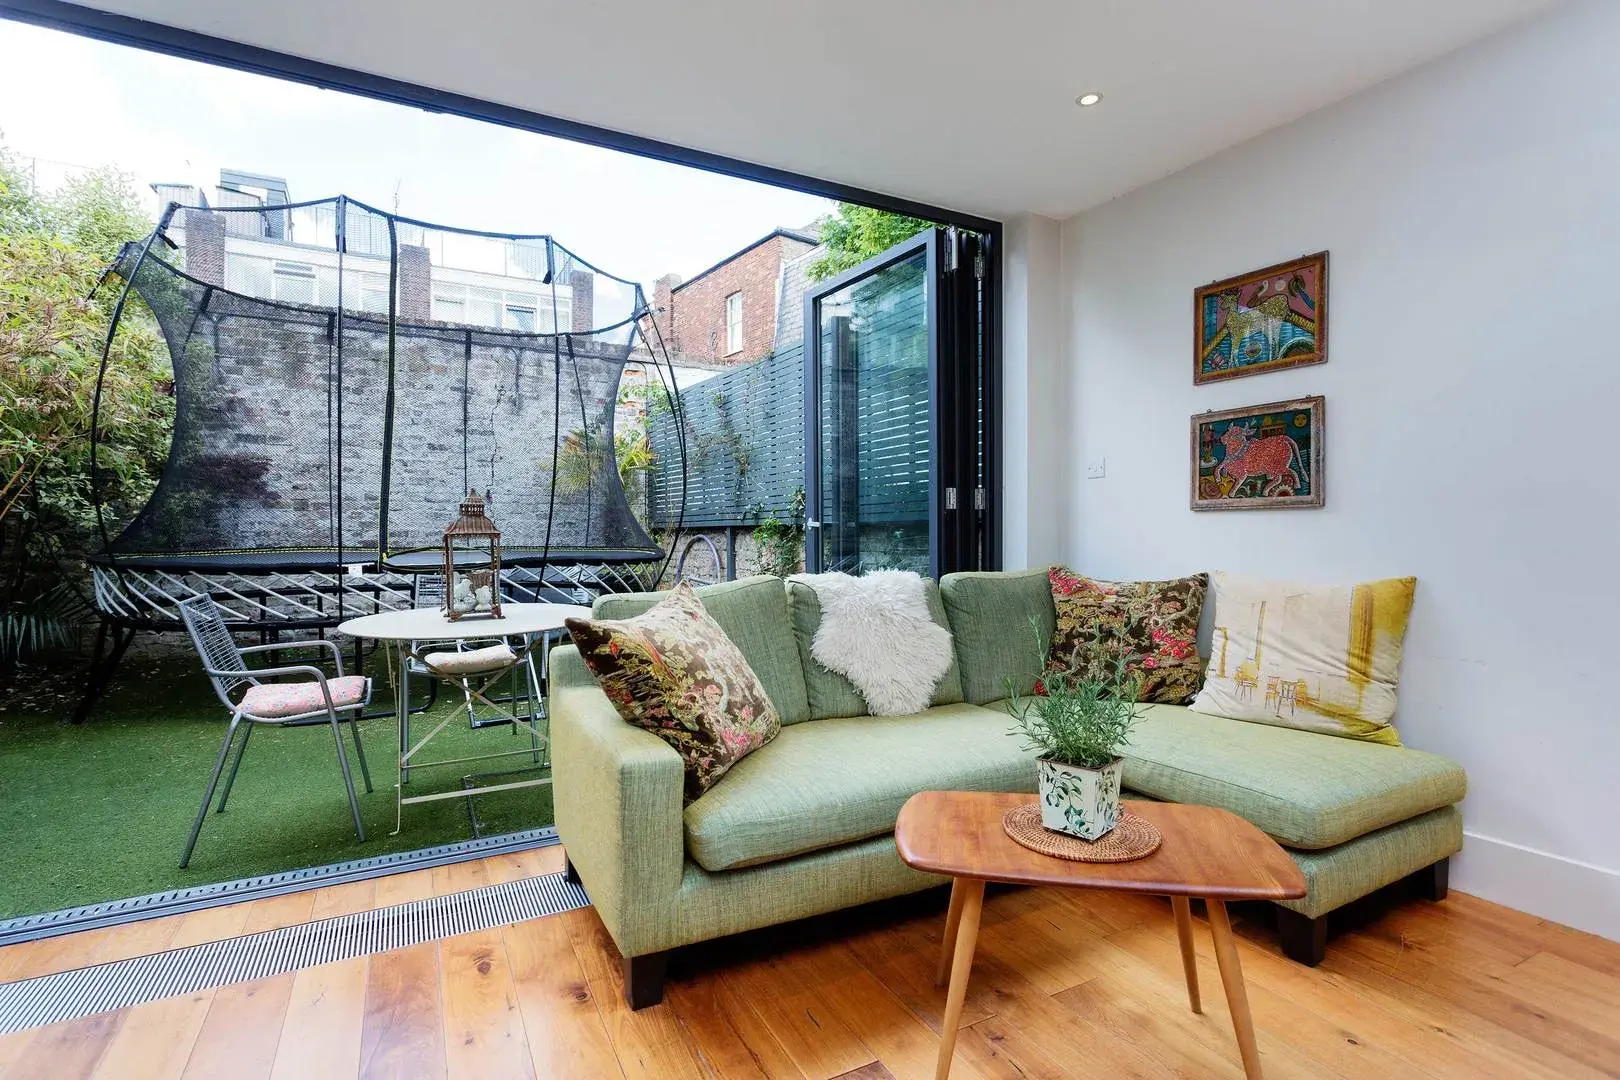 Woodsome Road, holiday home in Highgate, London